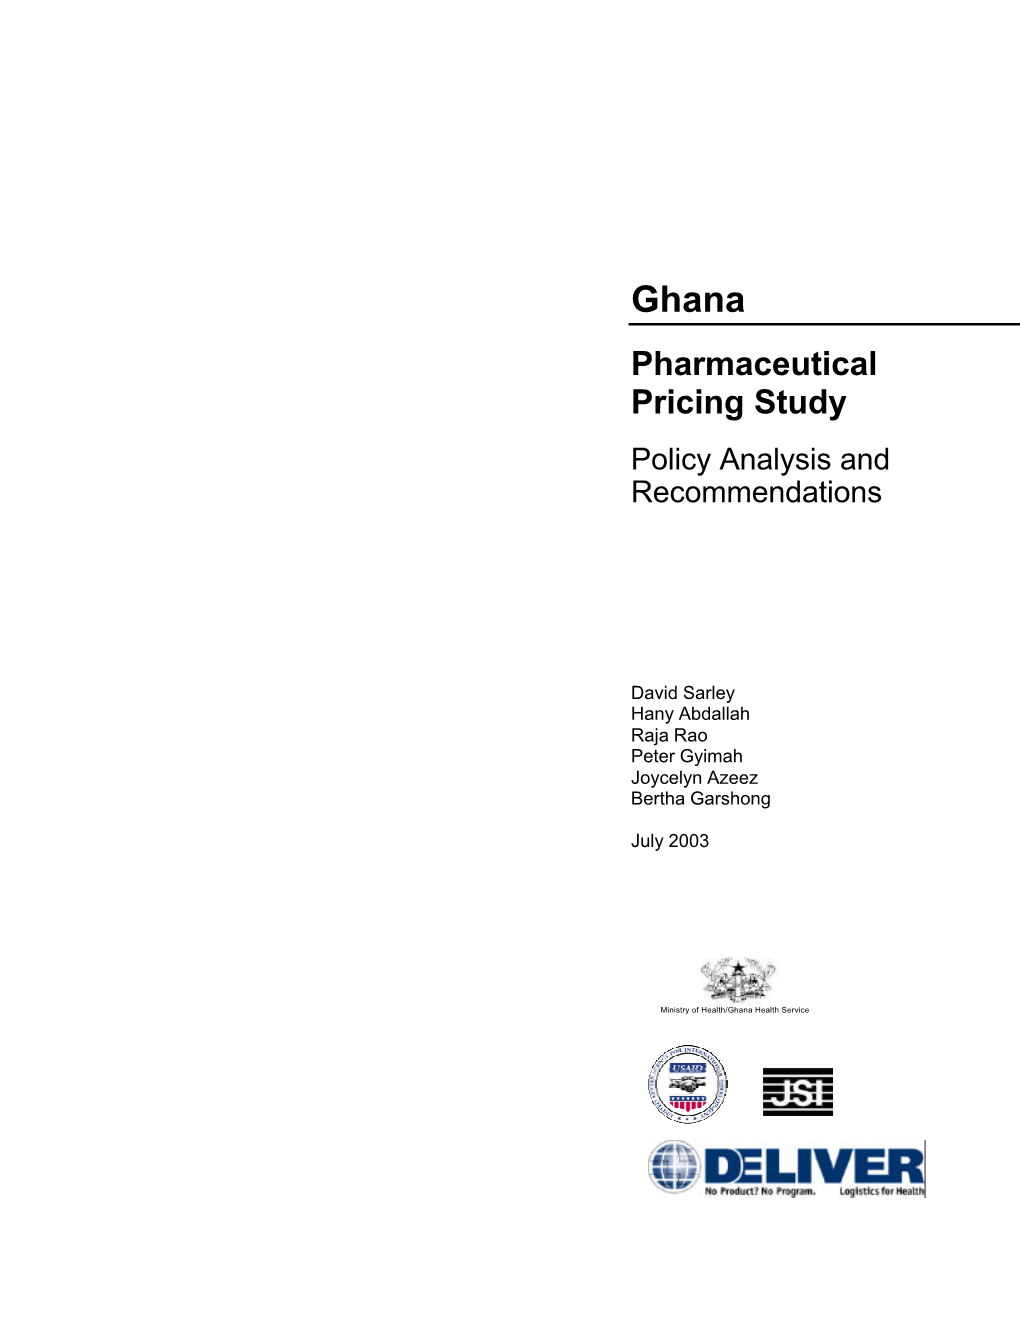 Ghana Pharmaceutical Pricing Study Policy Analysis and Recommendations